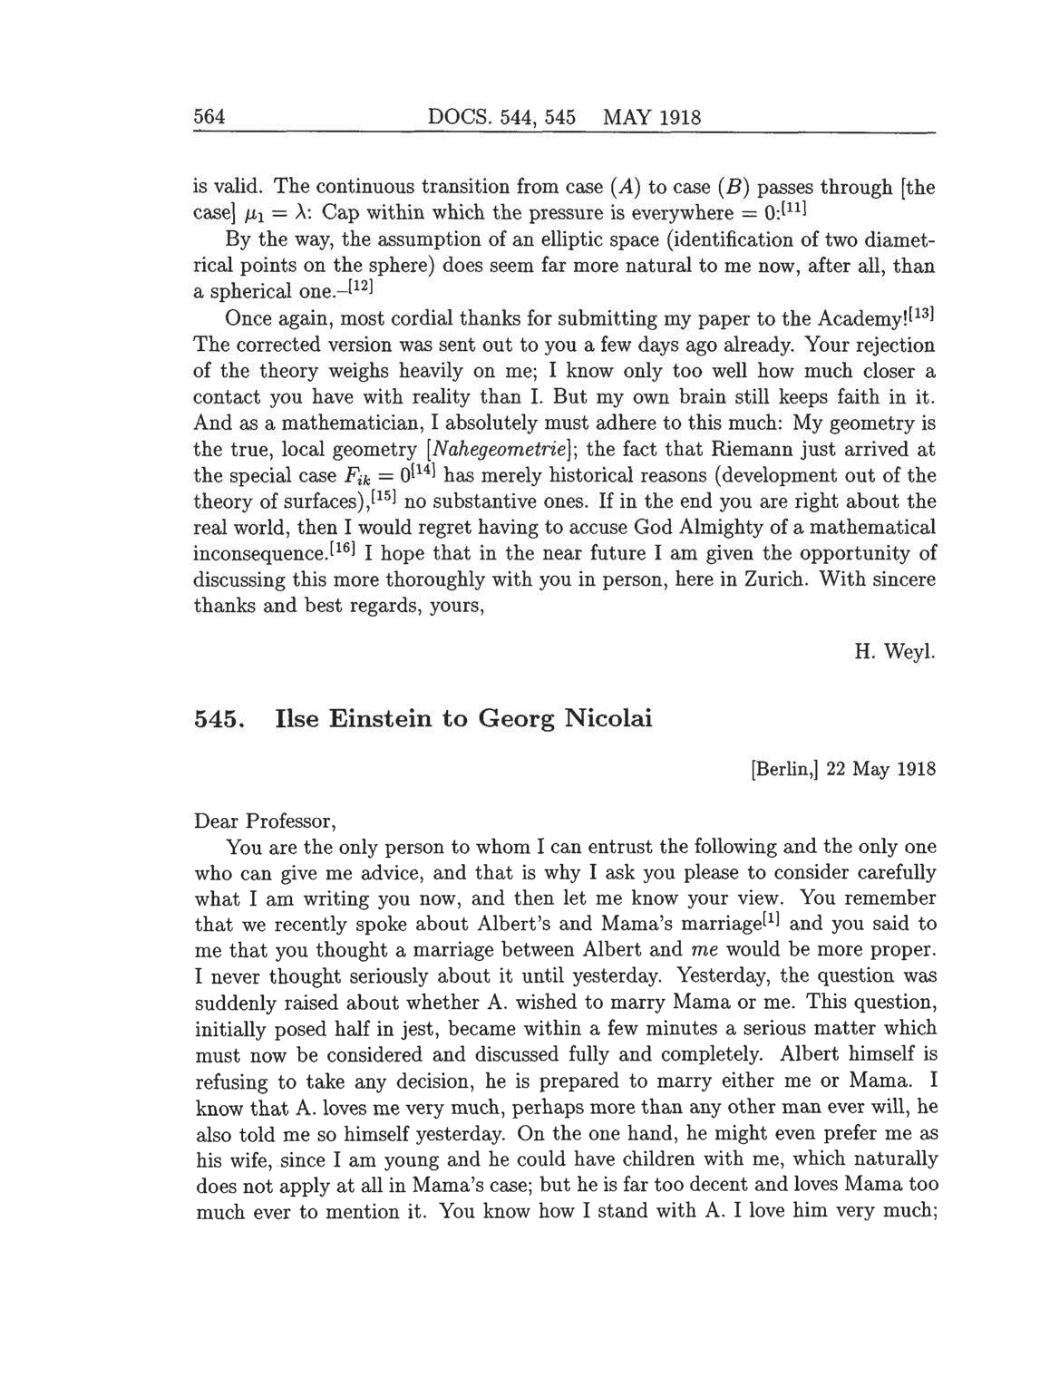 Volume 8: The Berlin Years: Correspondence, 1914-1918 (English translation supplement) page 564